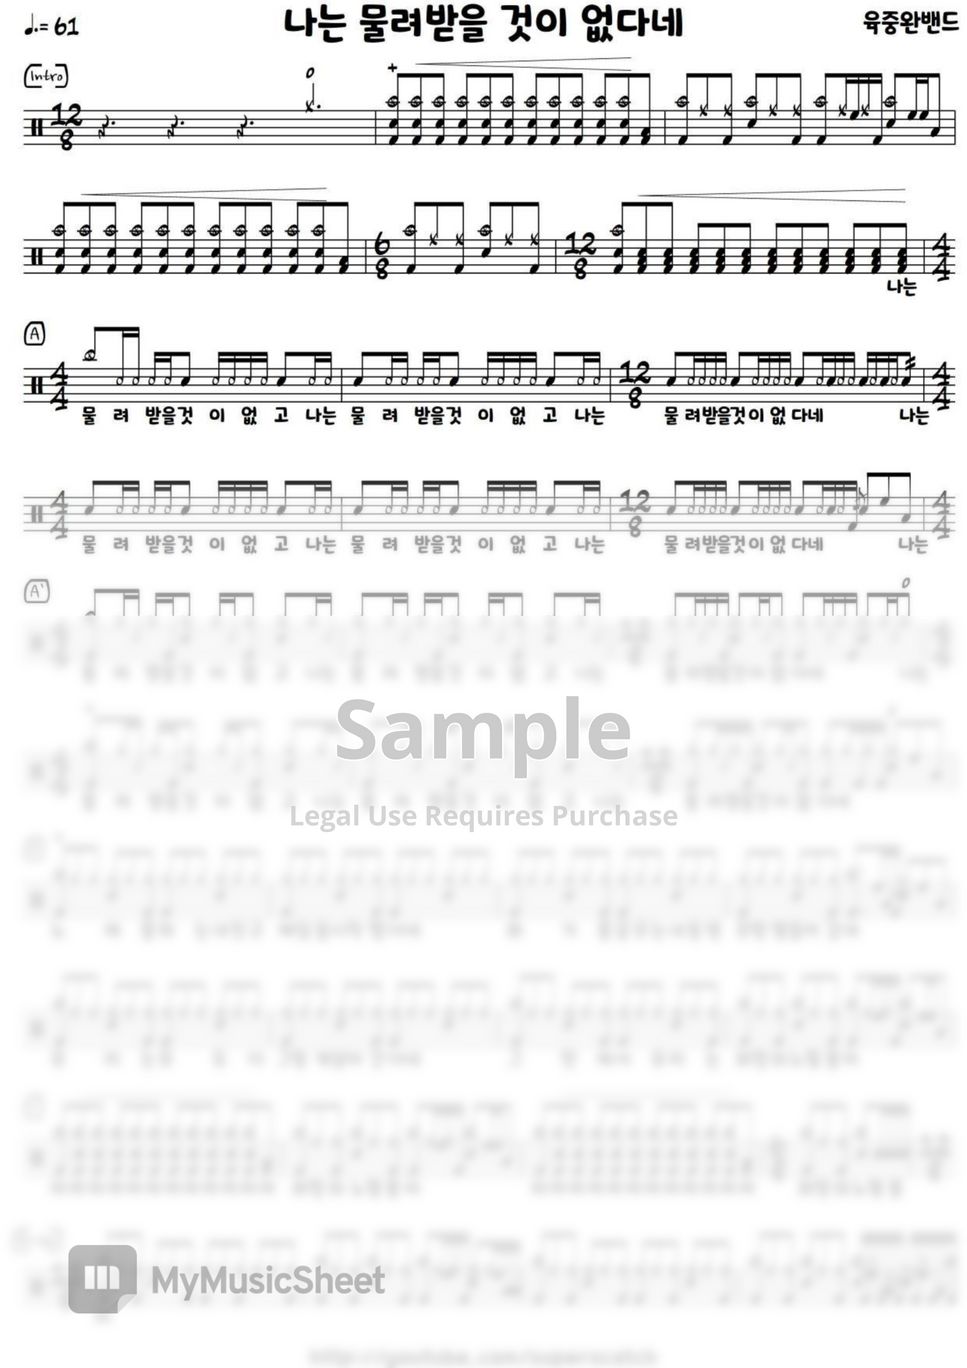 6Band - I Have Nothing To Inherit (drum sheet music) by superscatch